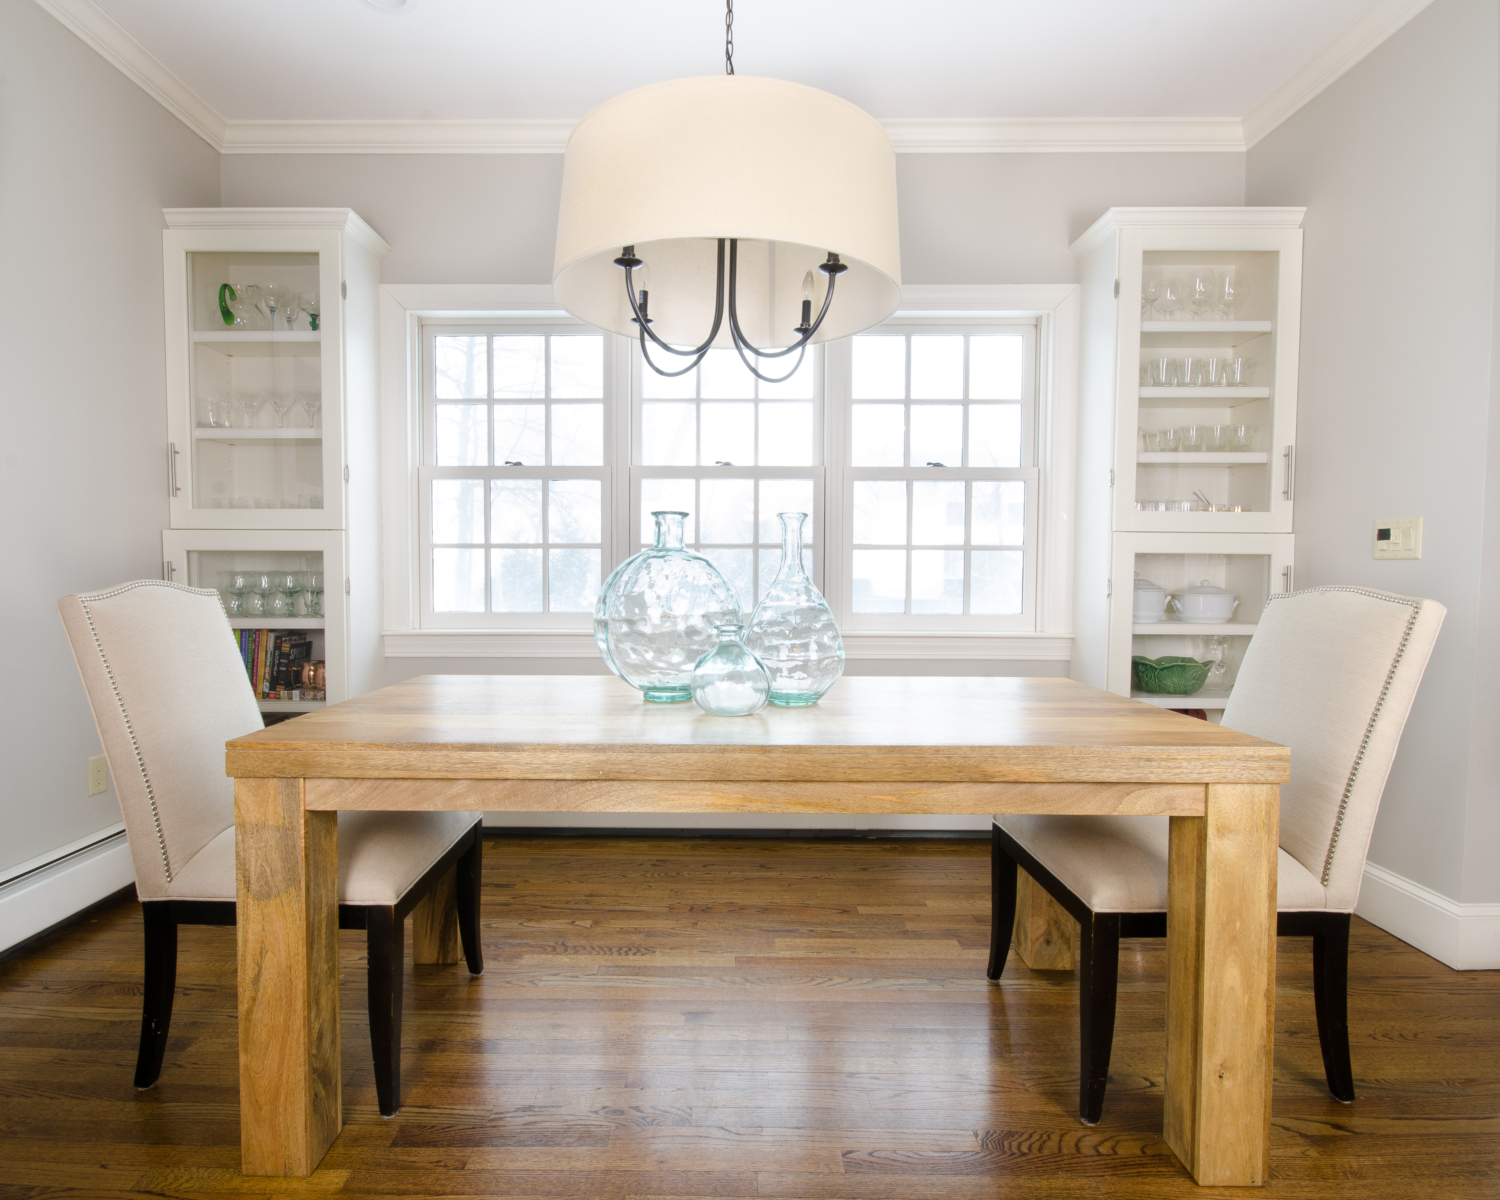 An affordable farmhouse table for under $350 with free shipping. See how it fits into plans for a stylish, family-friendly breakfast nook.